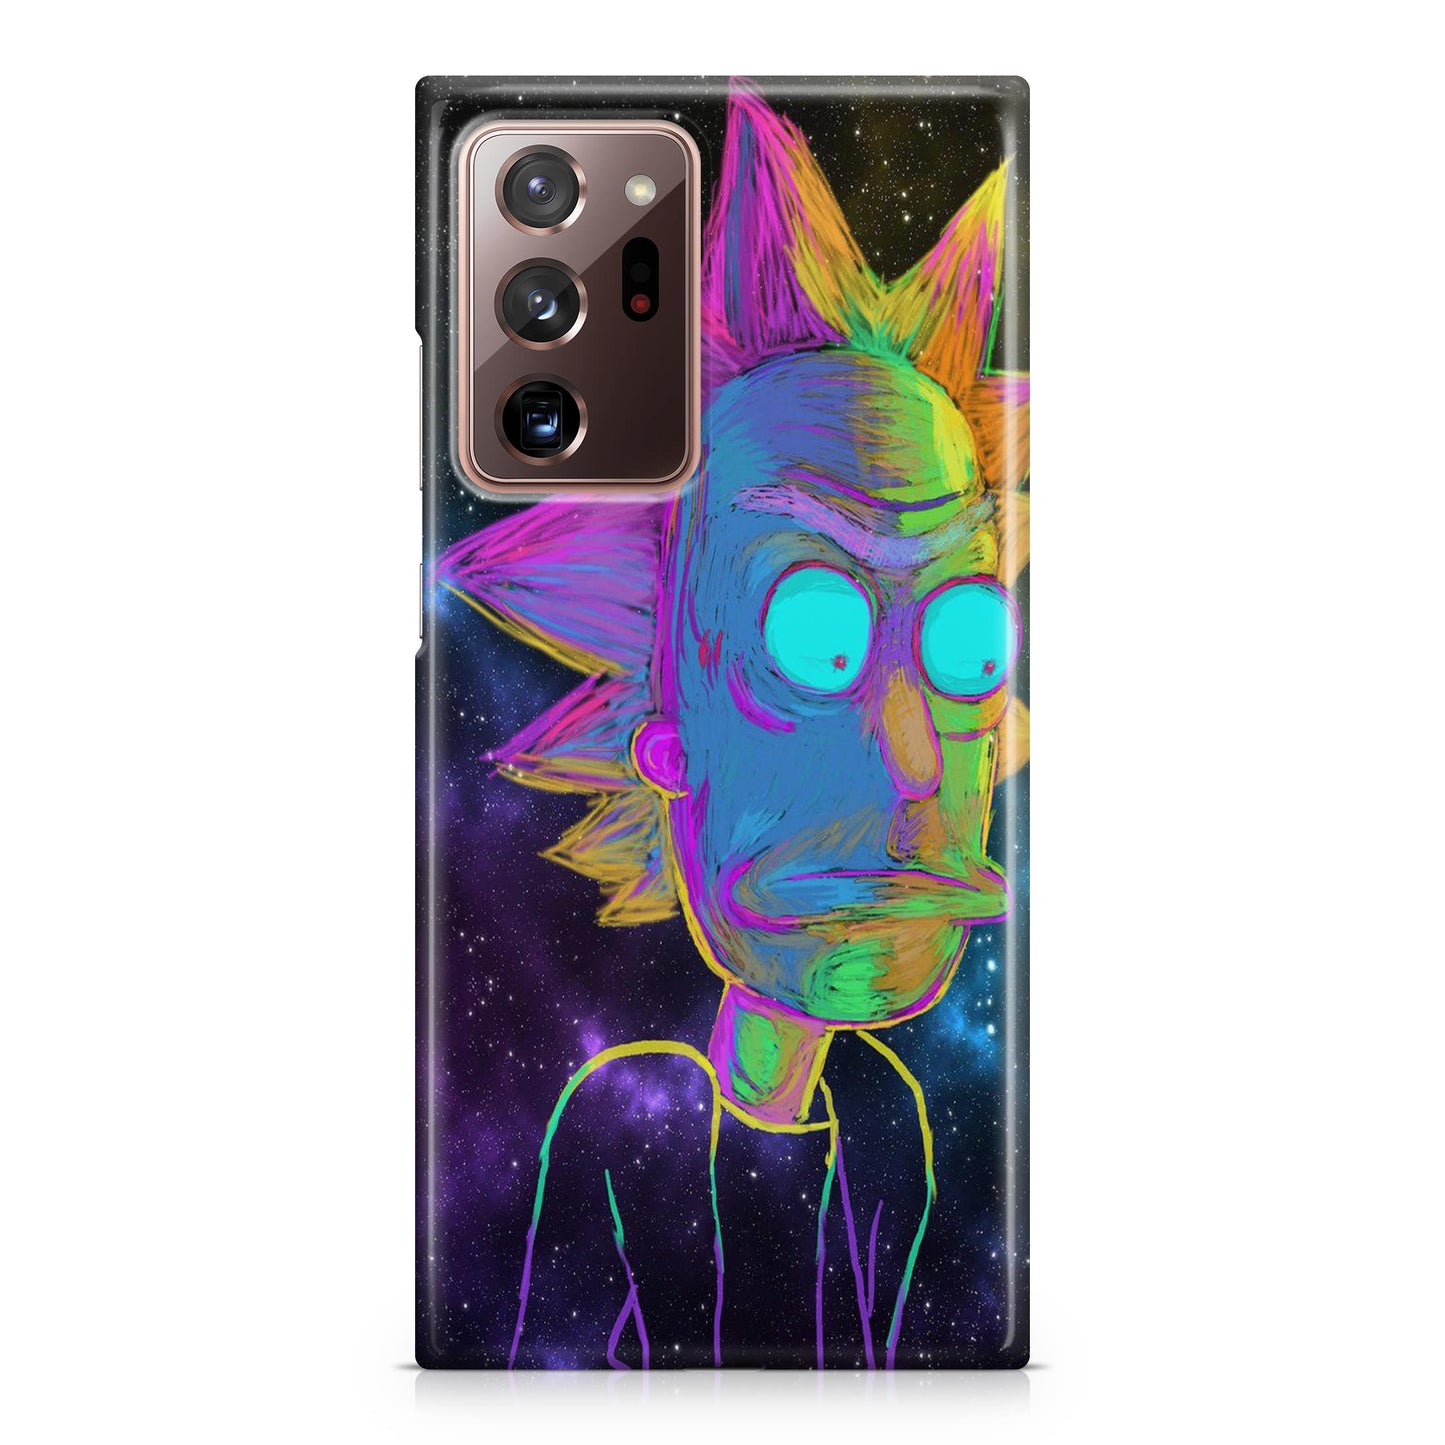 Rick Colorful Crayon Space Galaxy Note 20 Ultra Case